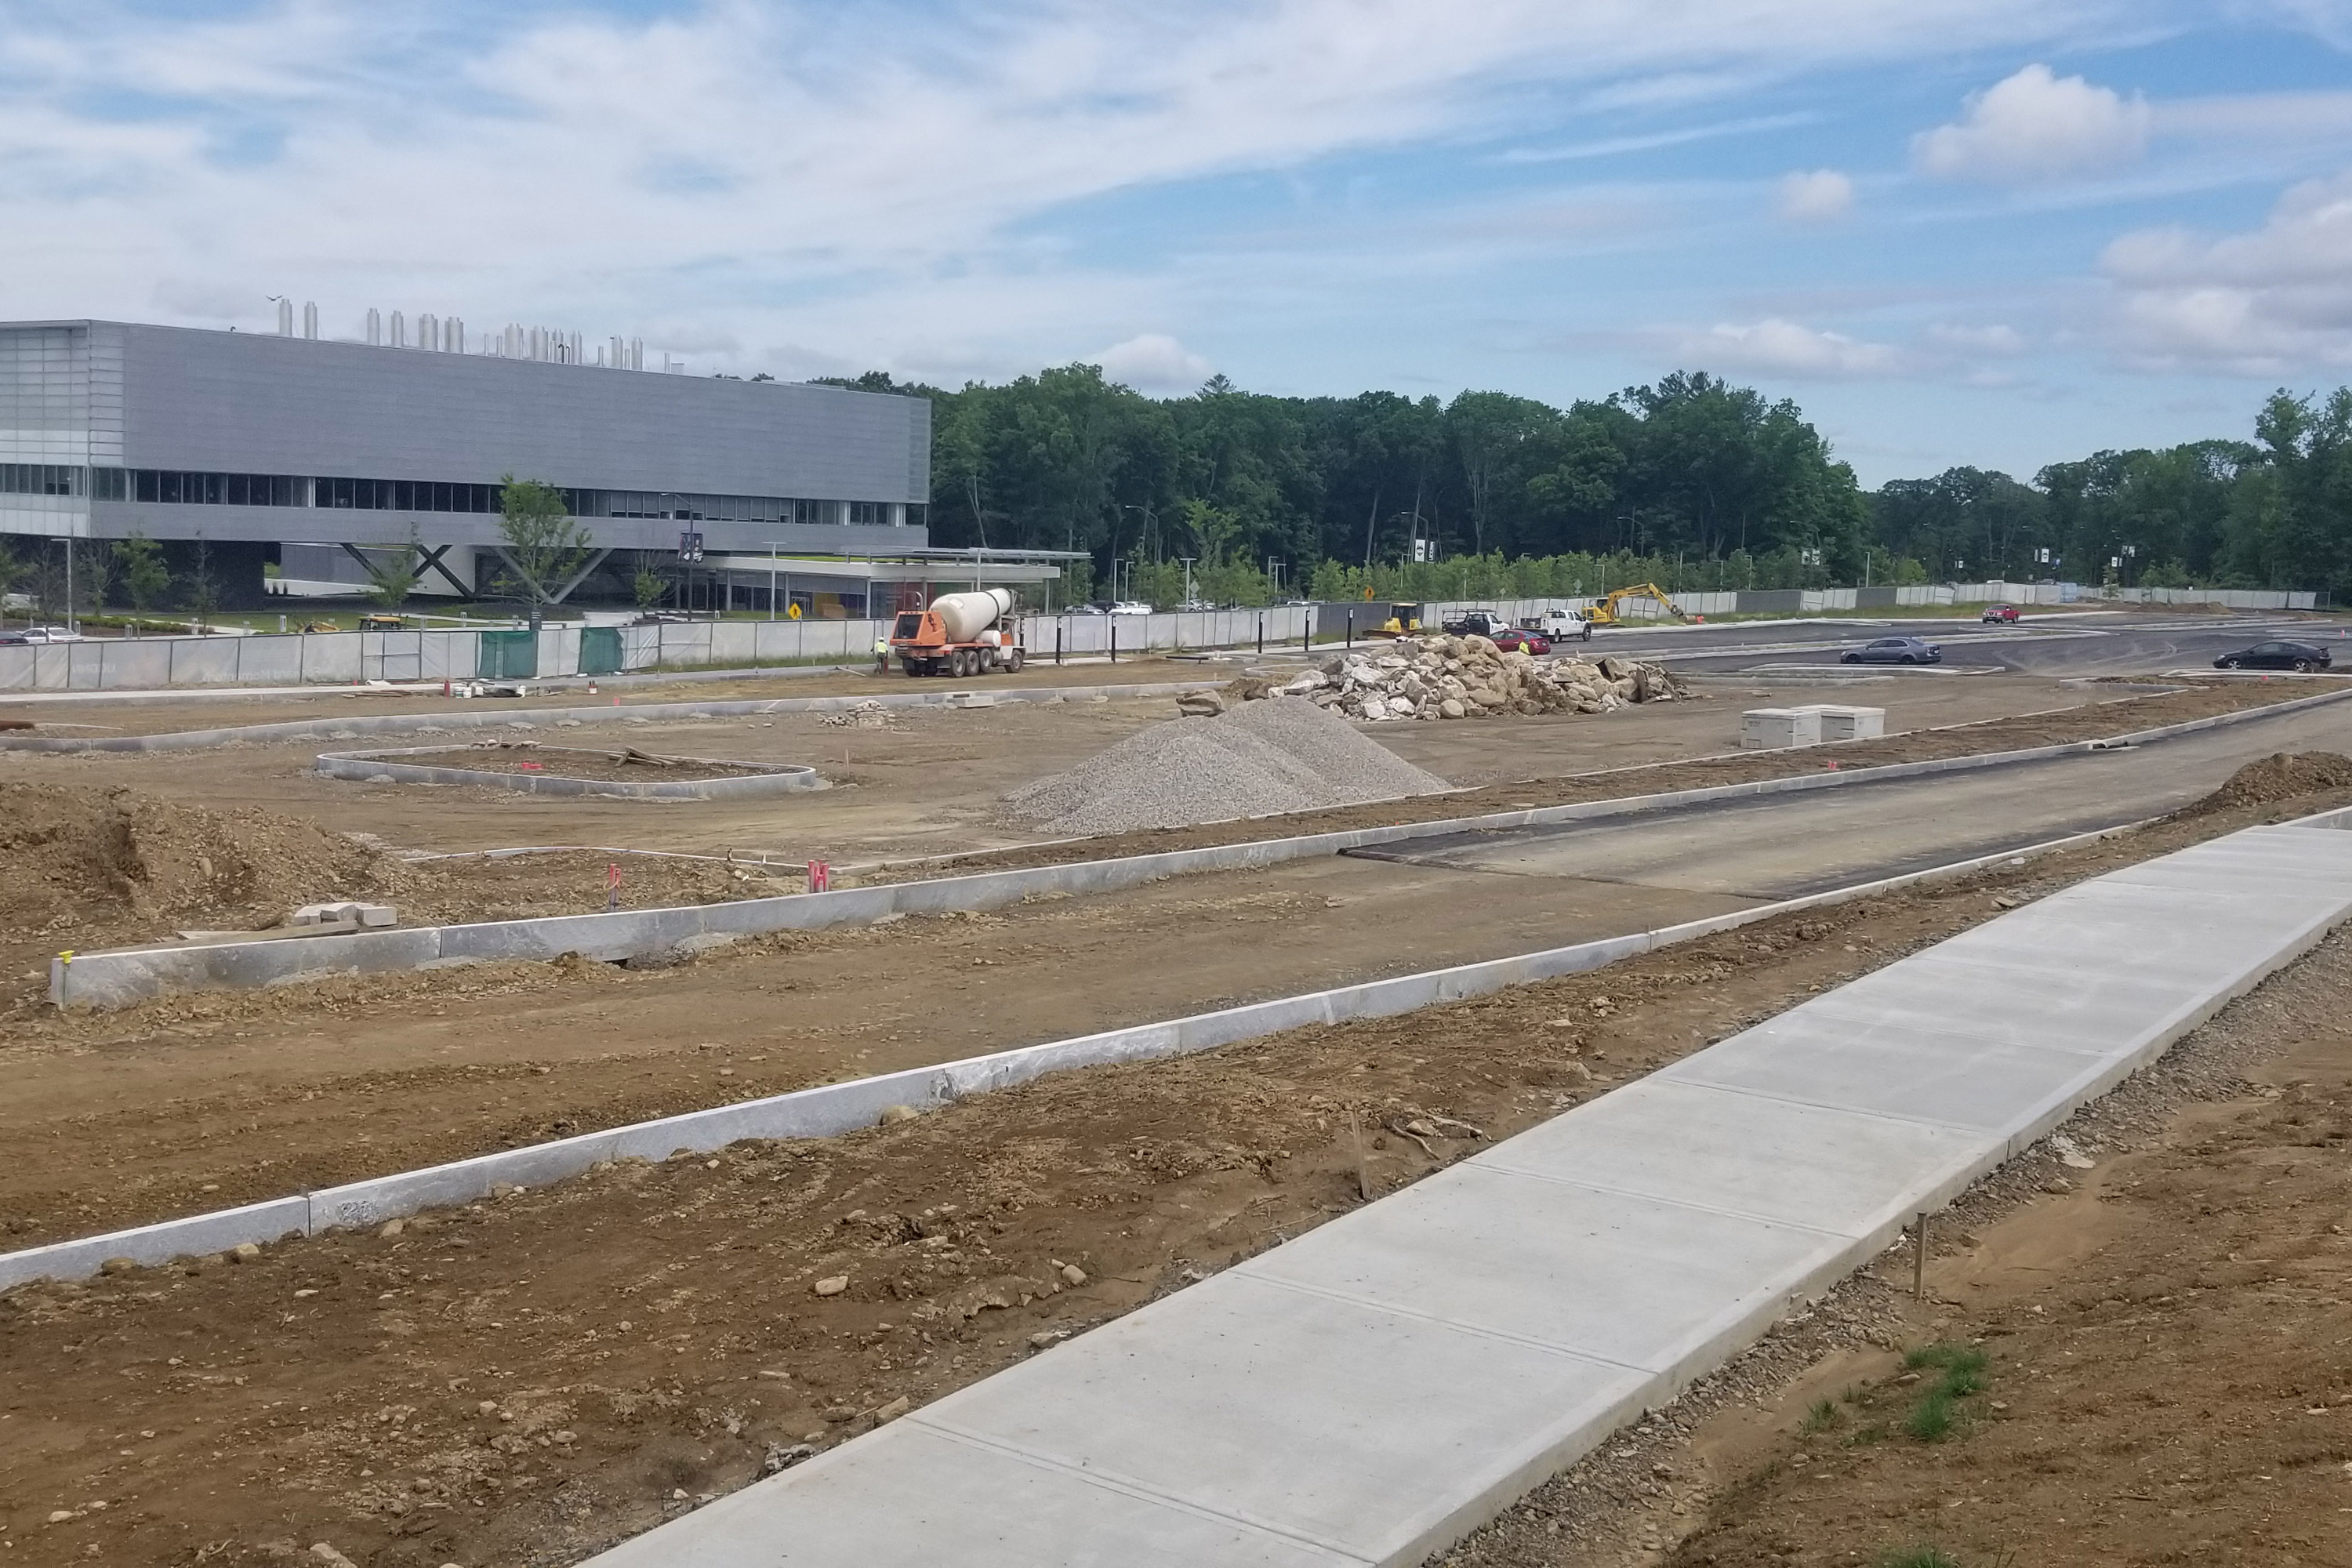 Lot K, a new parking lot on Discovery Drive across from the Innovation Partnership Building, will be completed prior to the fall 2019 semester, providing 700 spaces for commuter students. (Mike Enright/UConn Photo)